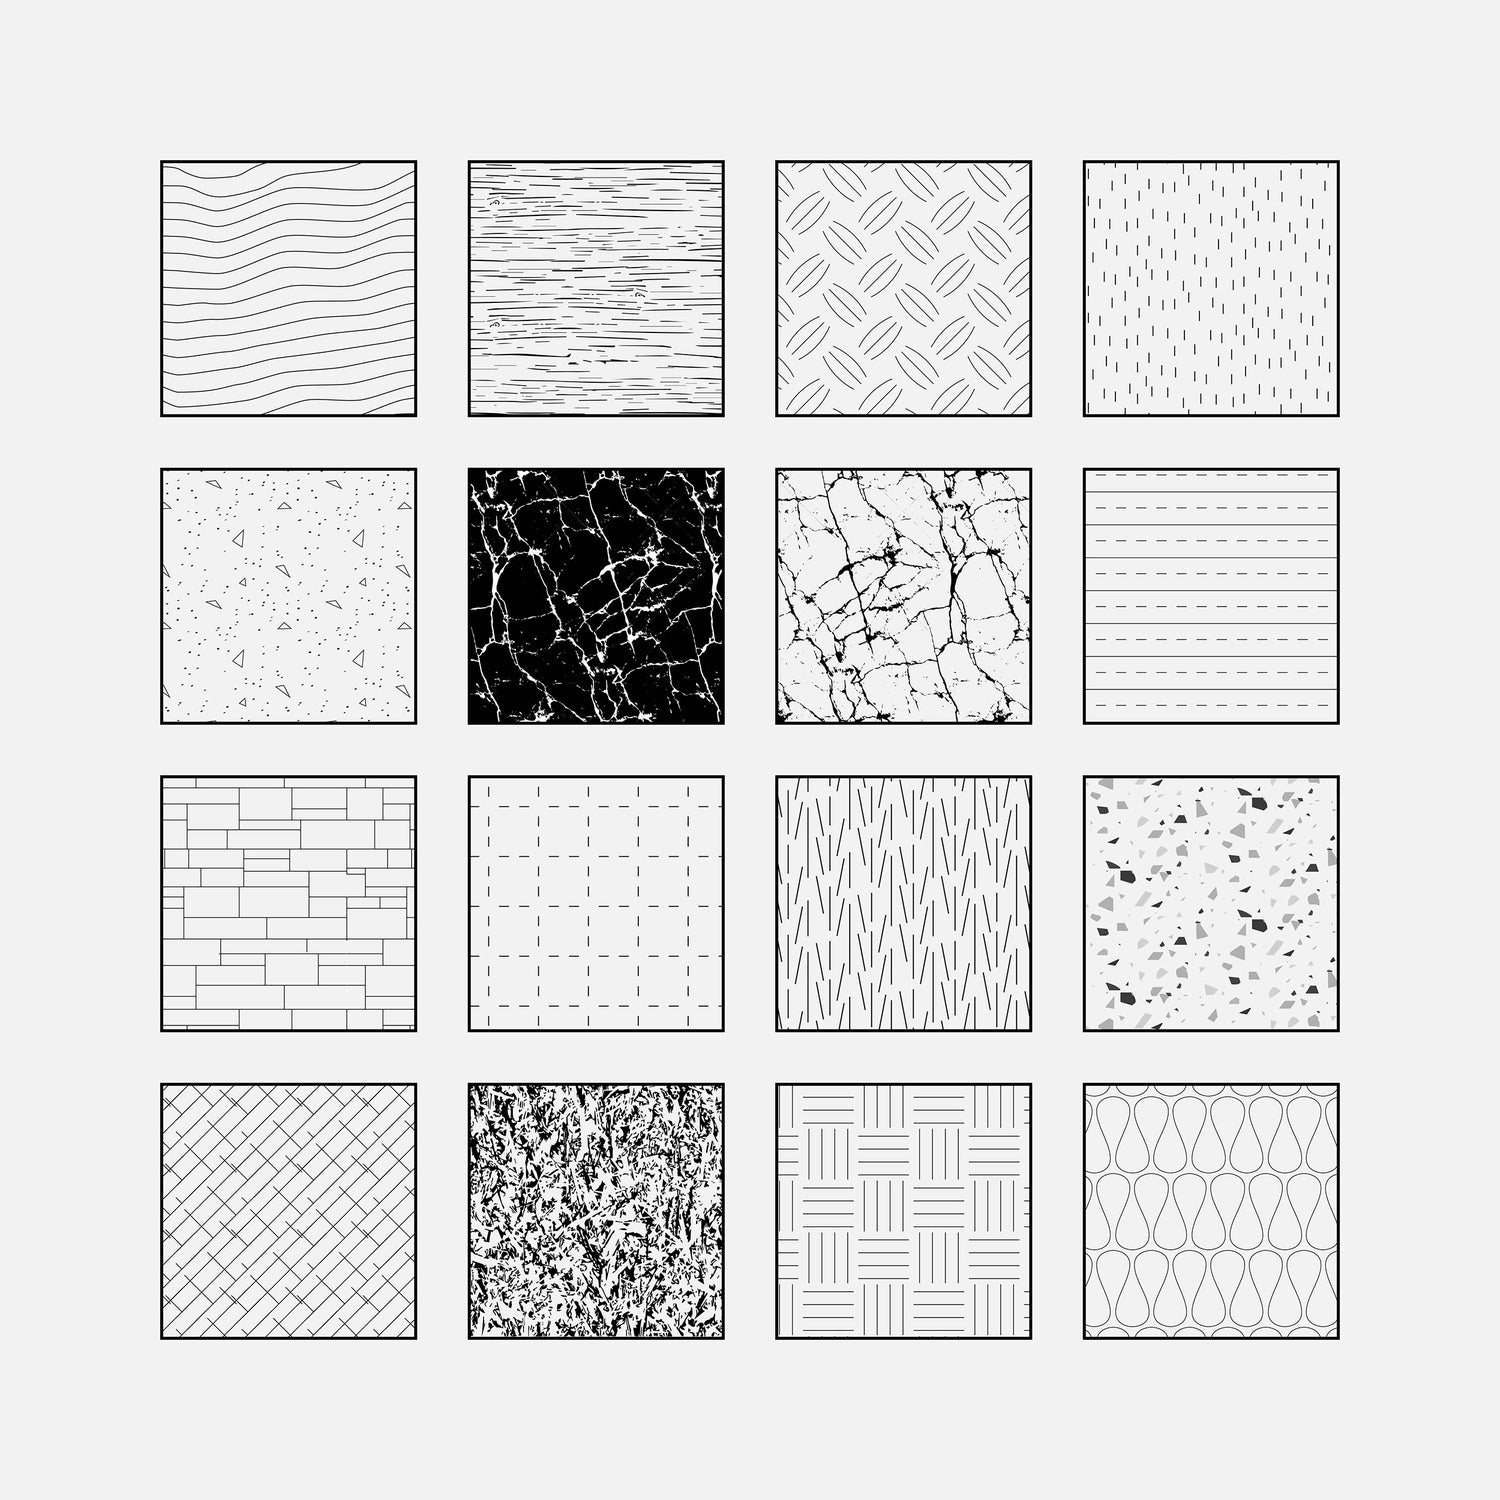 photoshop architectural patterns free download